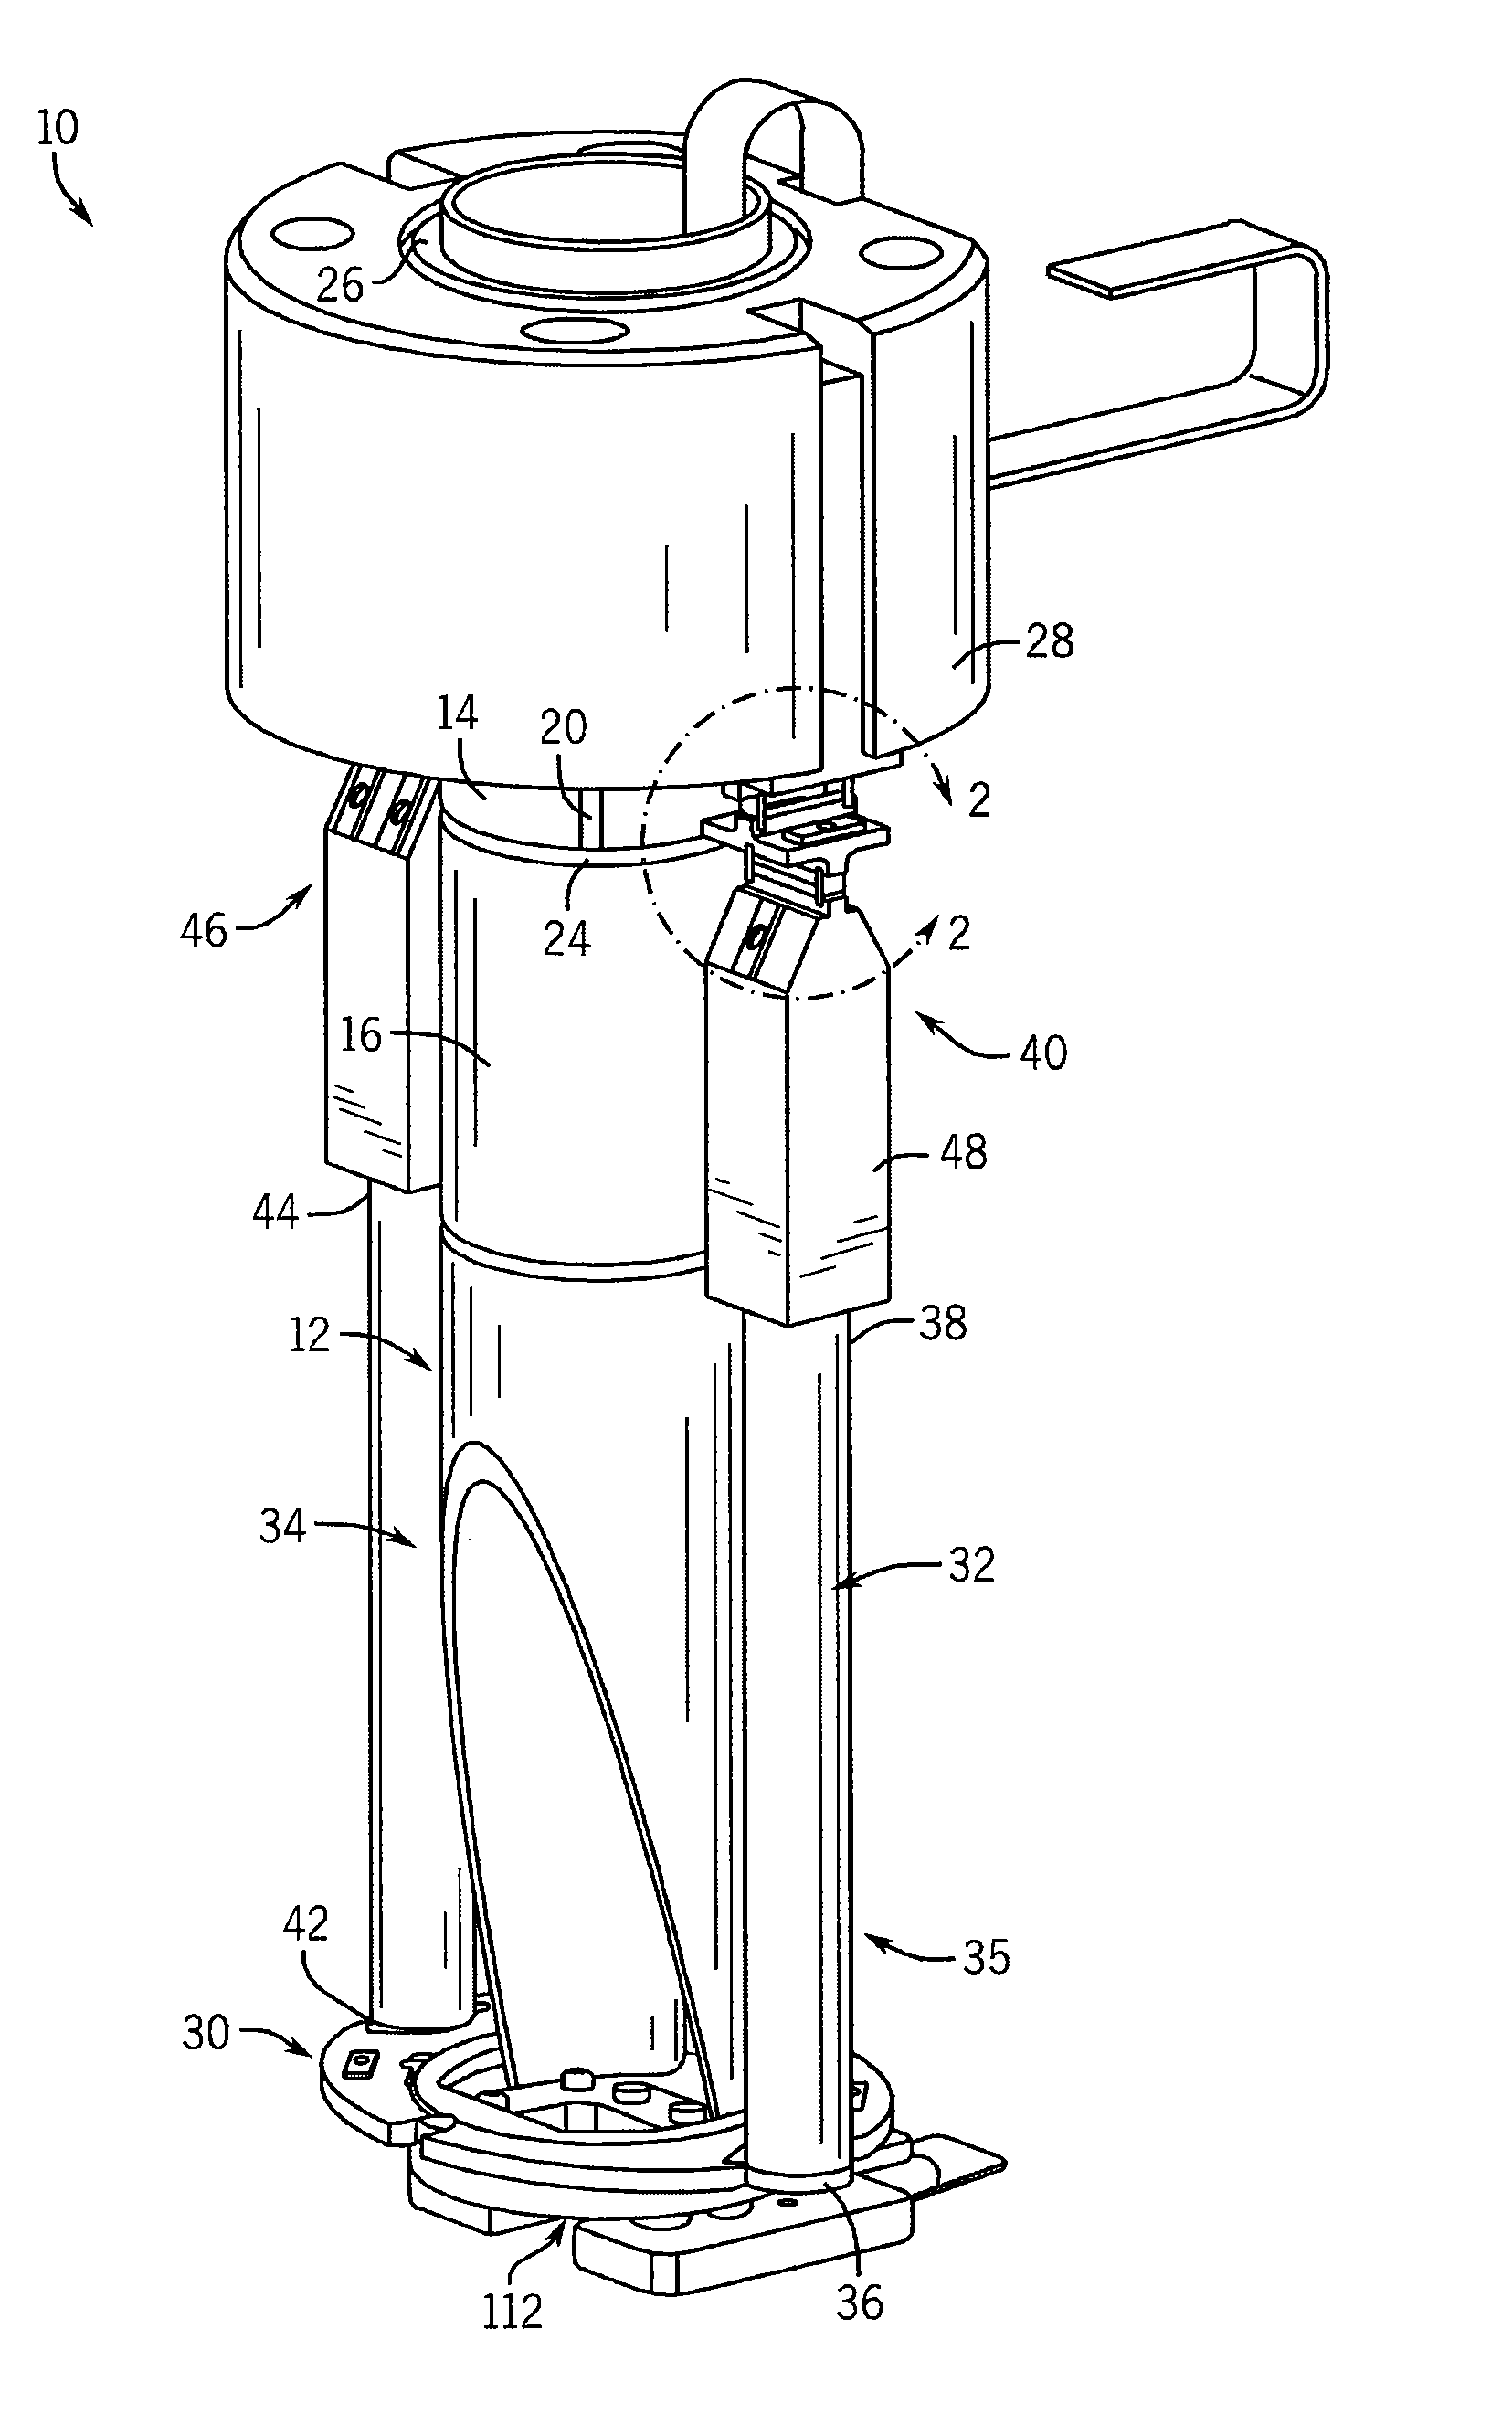 Scanning probe microscope having support stage incorporating a kinematic flexure arrangement